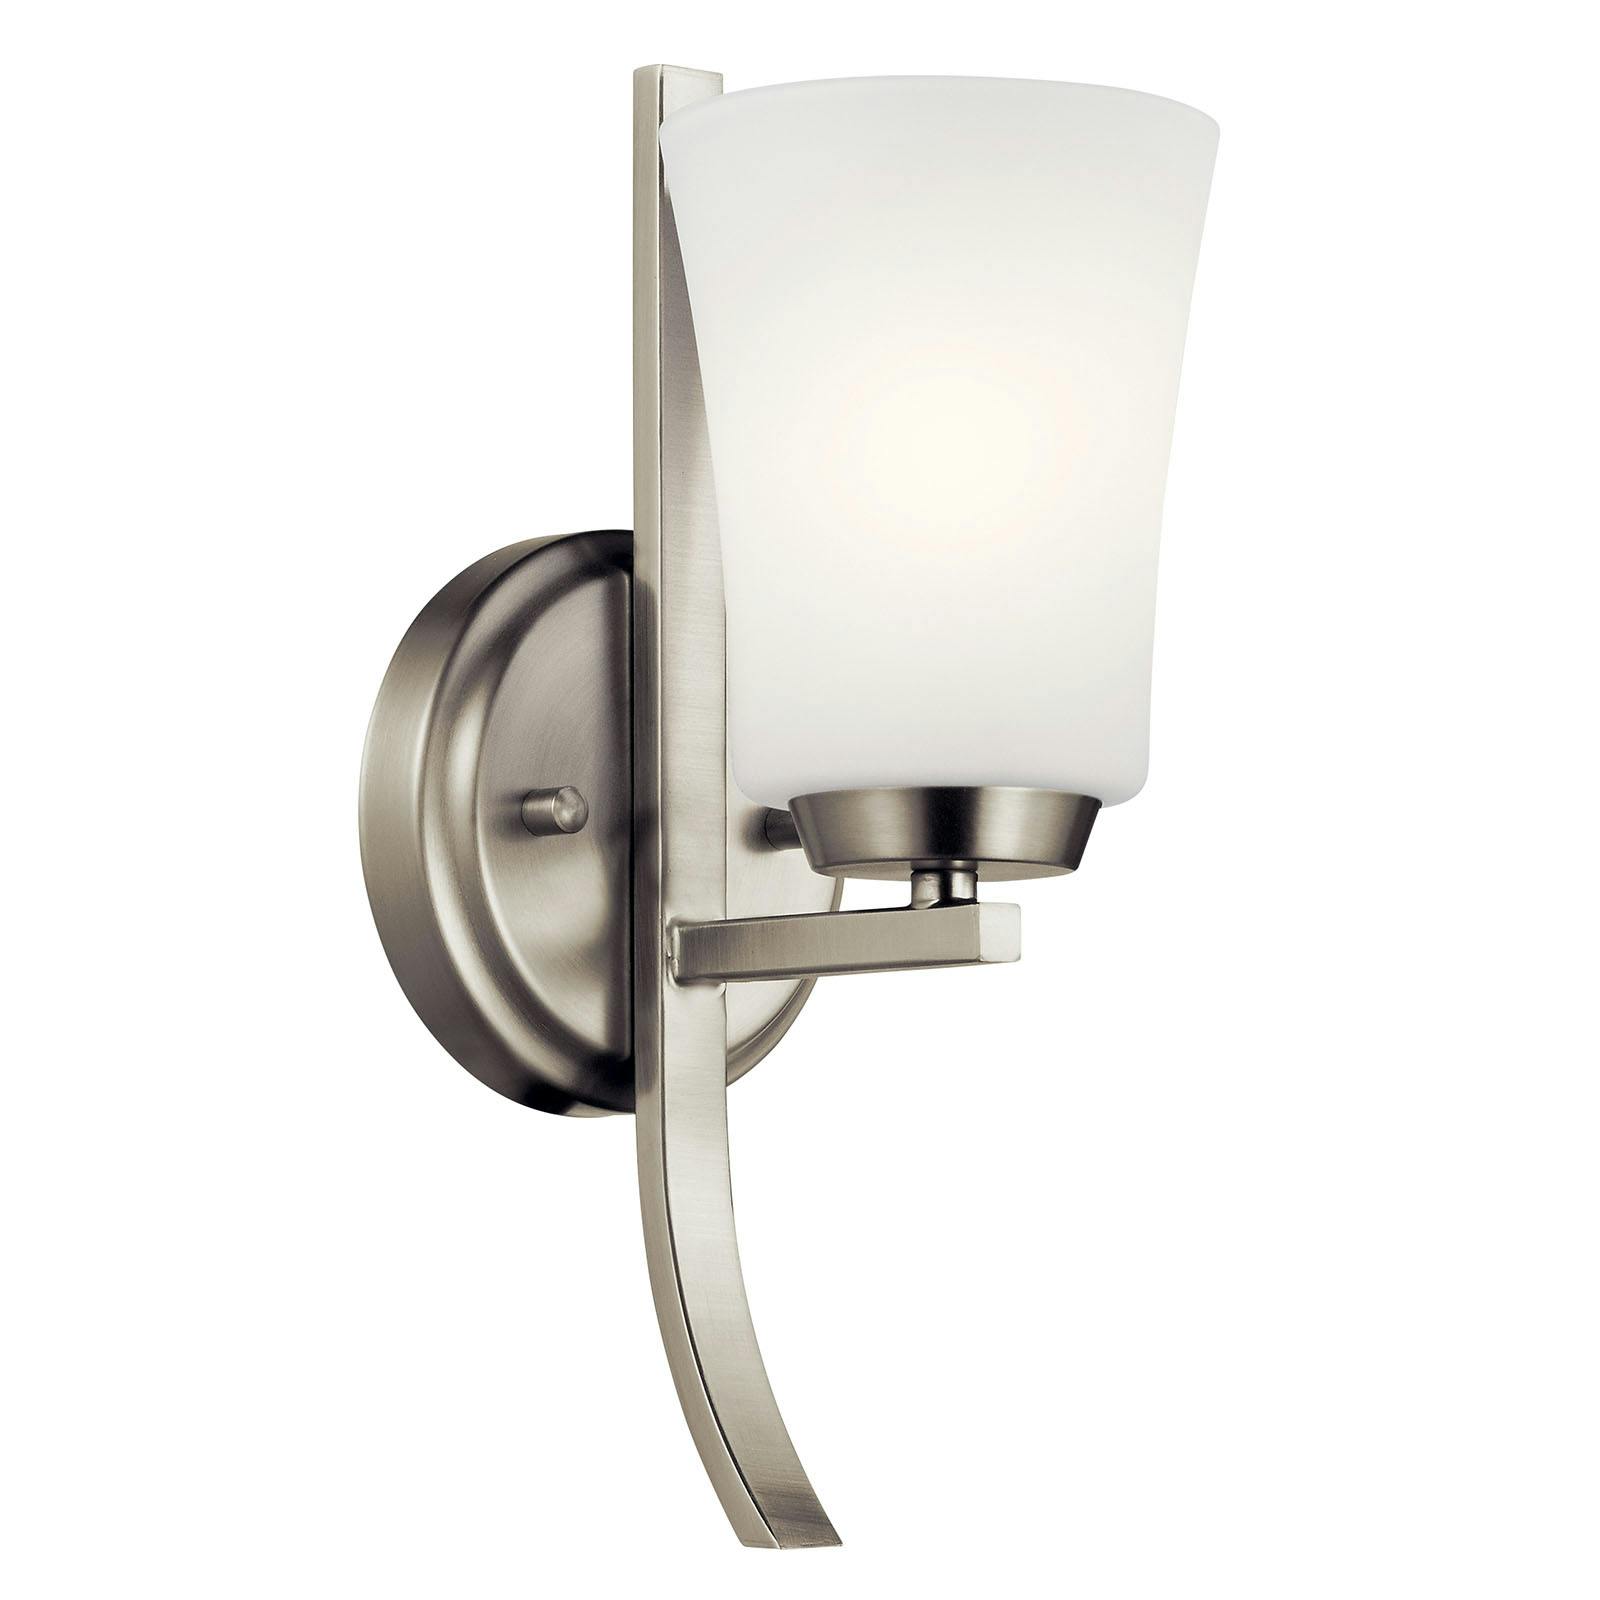 Tao 1 Light Wall Sconce Brushed Nickel on a white background